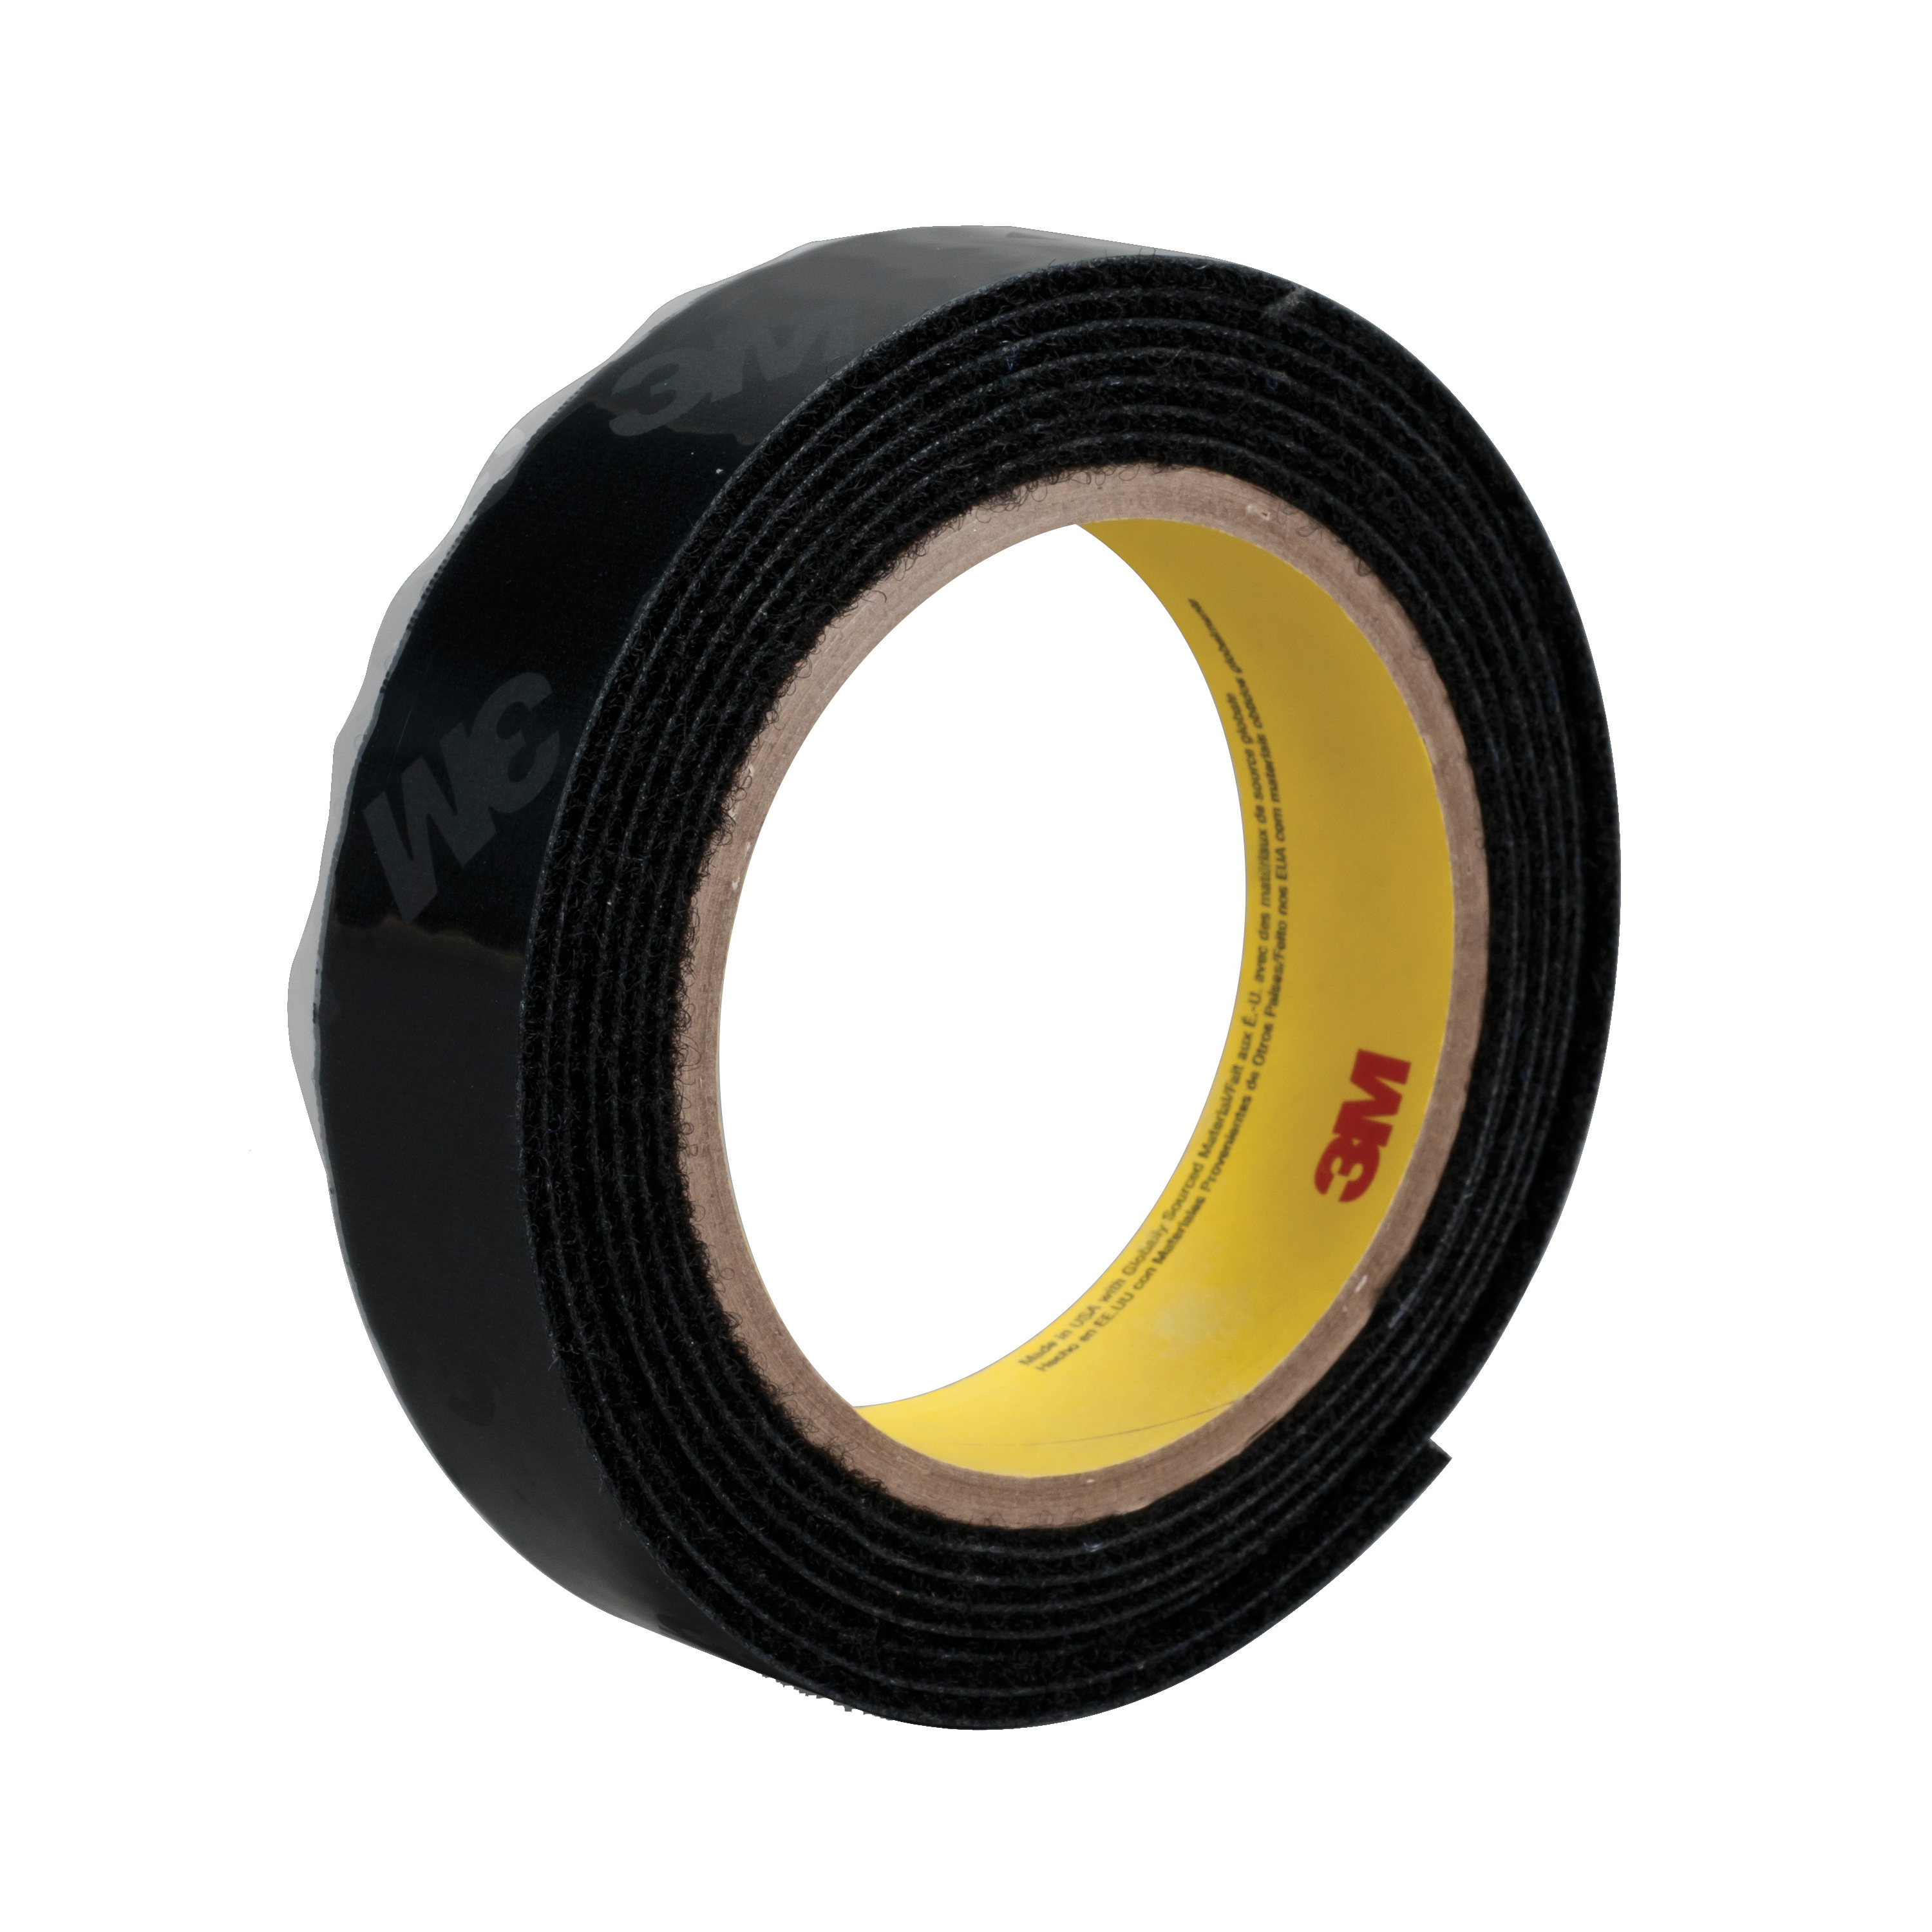 3M™ 021200-87297 Reclosable Loop Fastener Tape, 50 yd L x 2 in W, 0.17 in THK Engaged, High Performance Acrylic PSA Adhesive, Woven Nylon Backing, Black